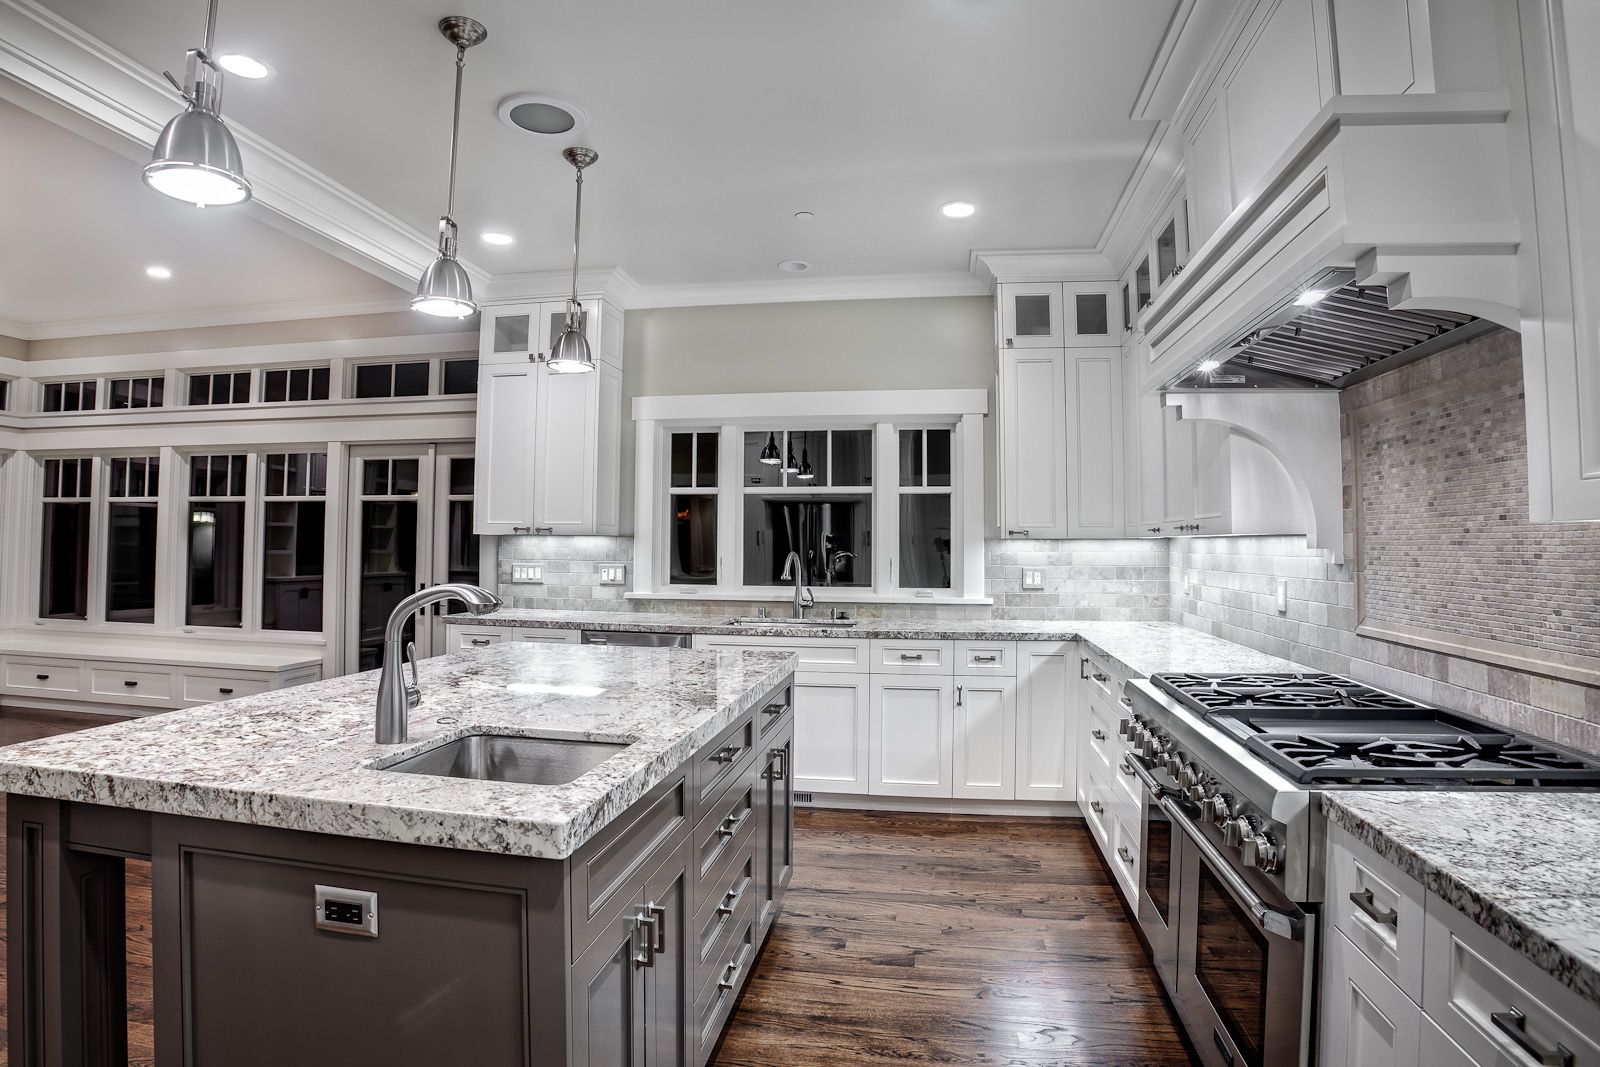 6 Things You Shouldn’t Do On Your Granite Countertops- Sina